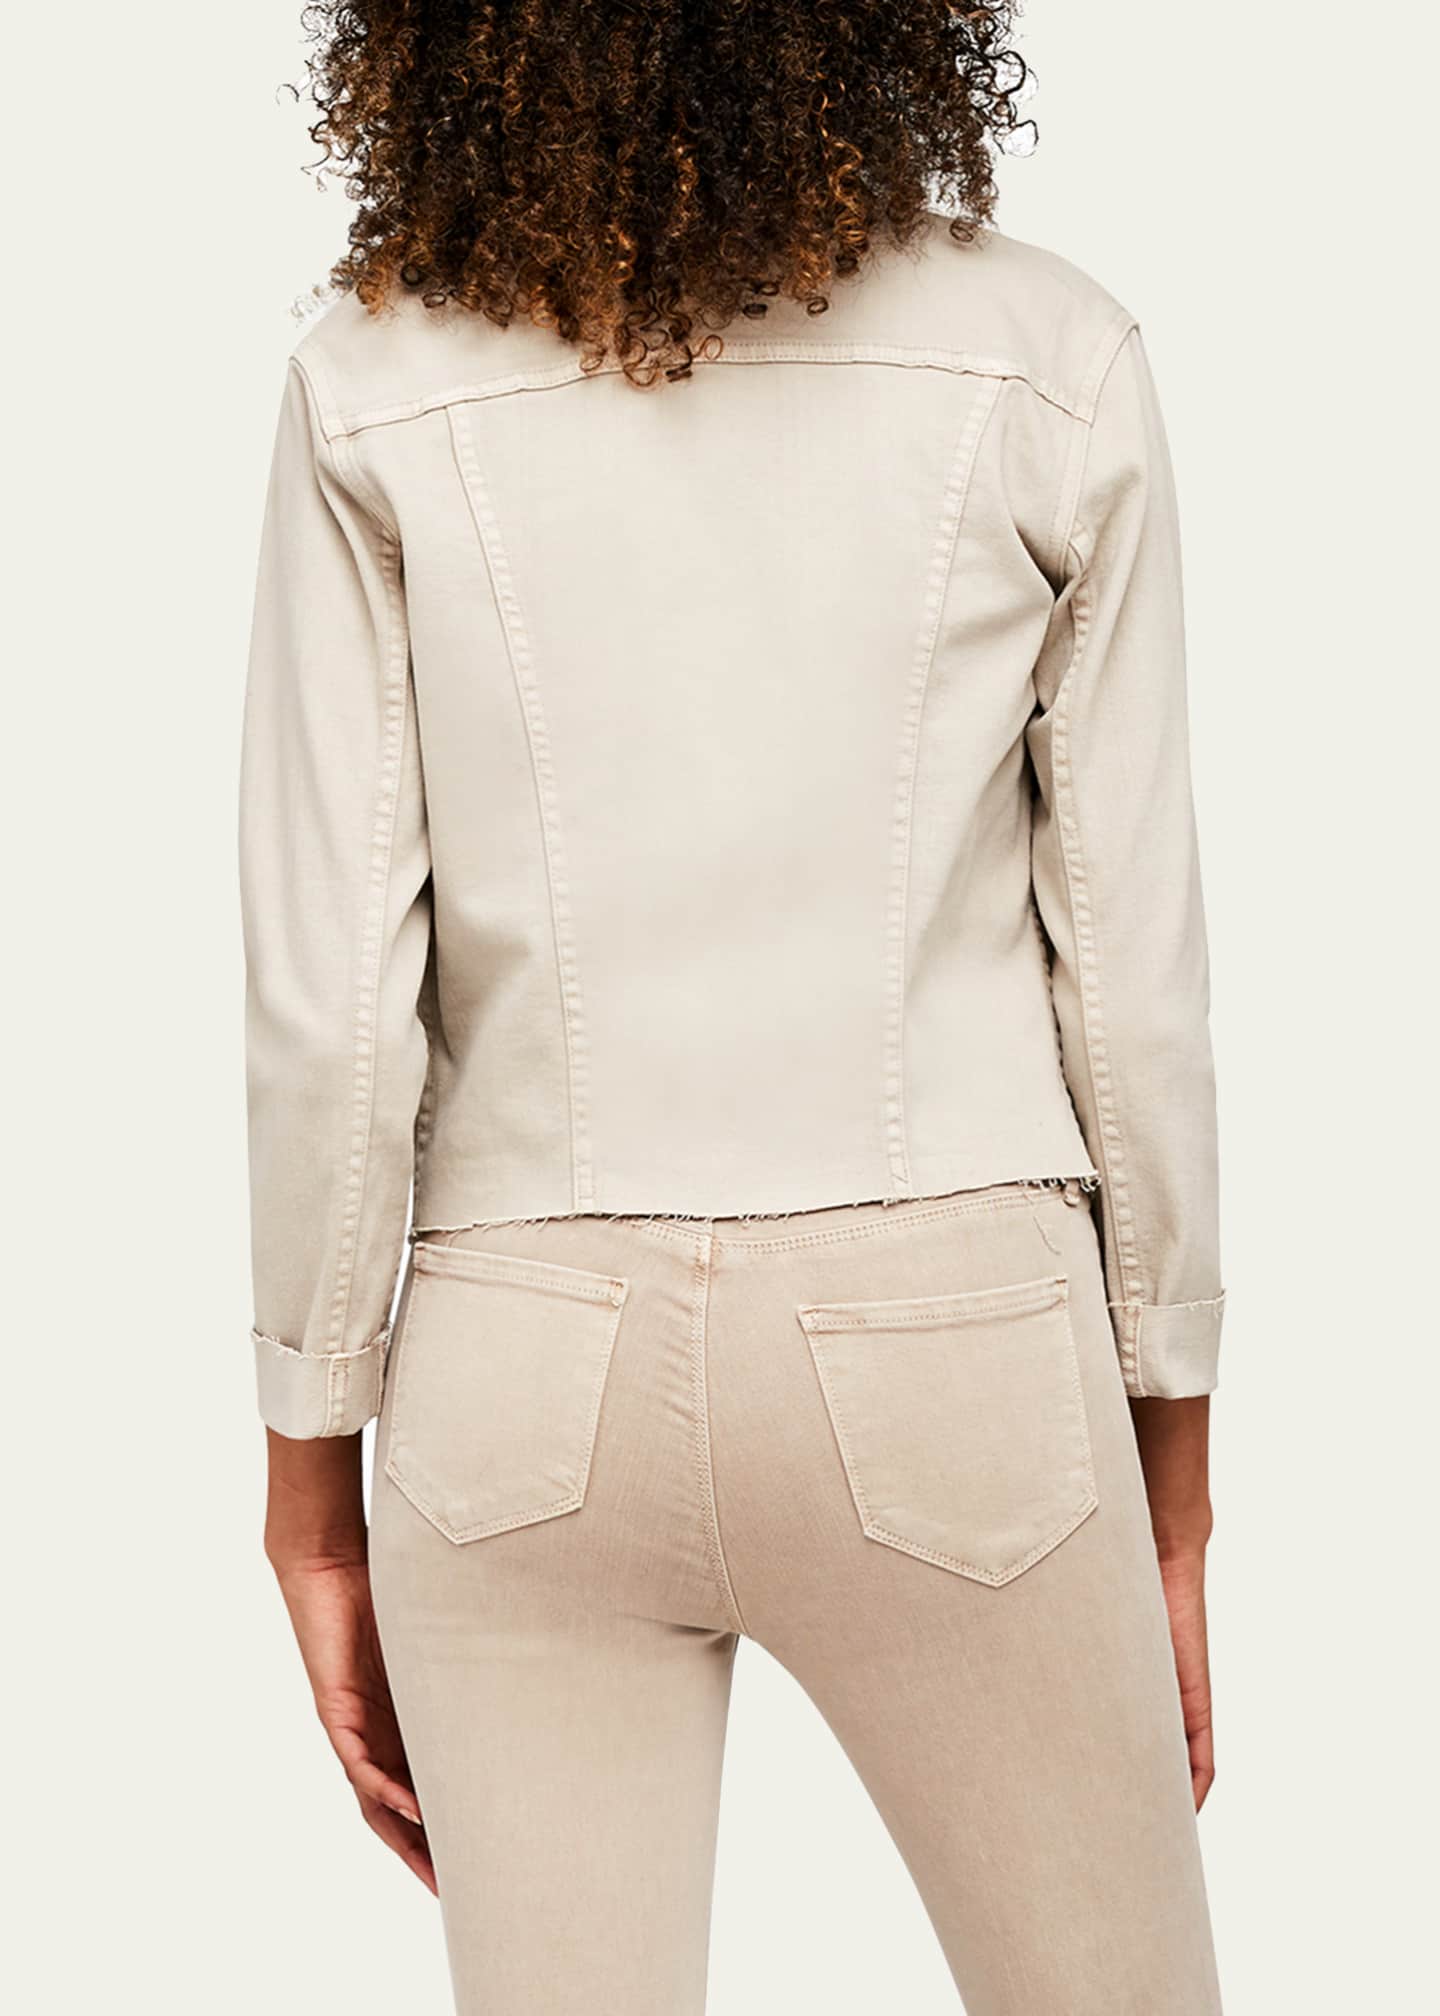 L'Agence Janelle Slim Cropped Jean Jacket with Raw Hem Image 3 of 5